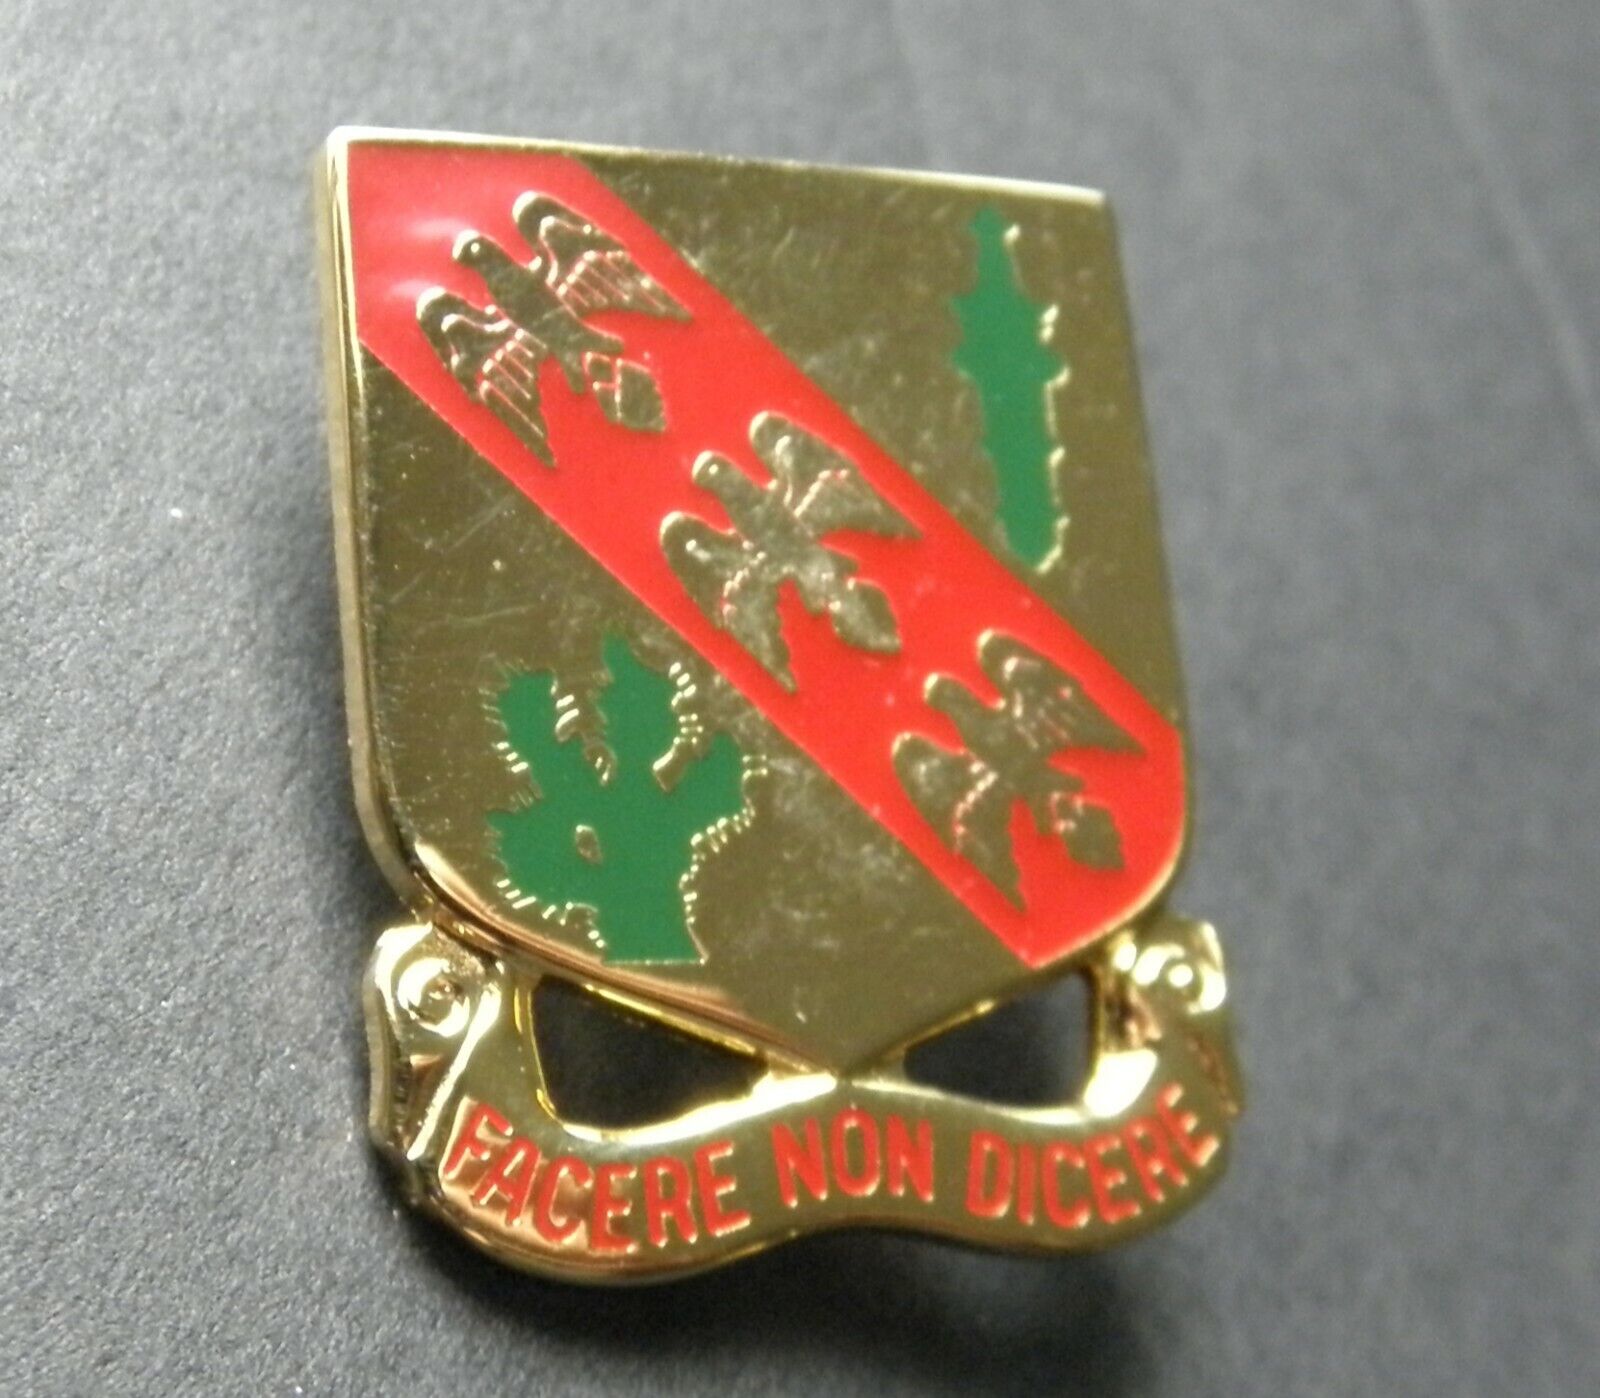 Army 107th Cavalry Regiment Lapel Pin Badge Crest 1 x 1.1 inches